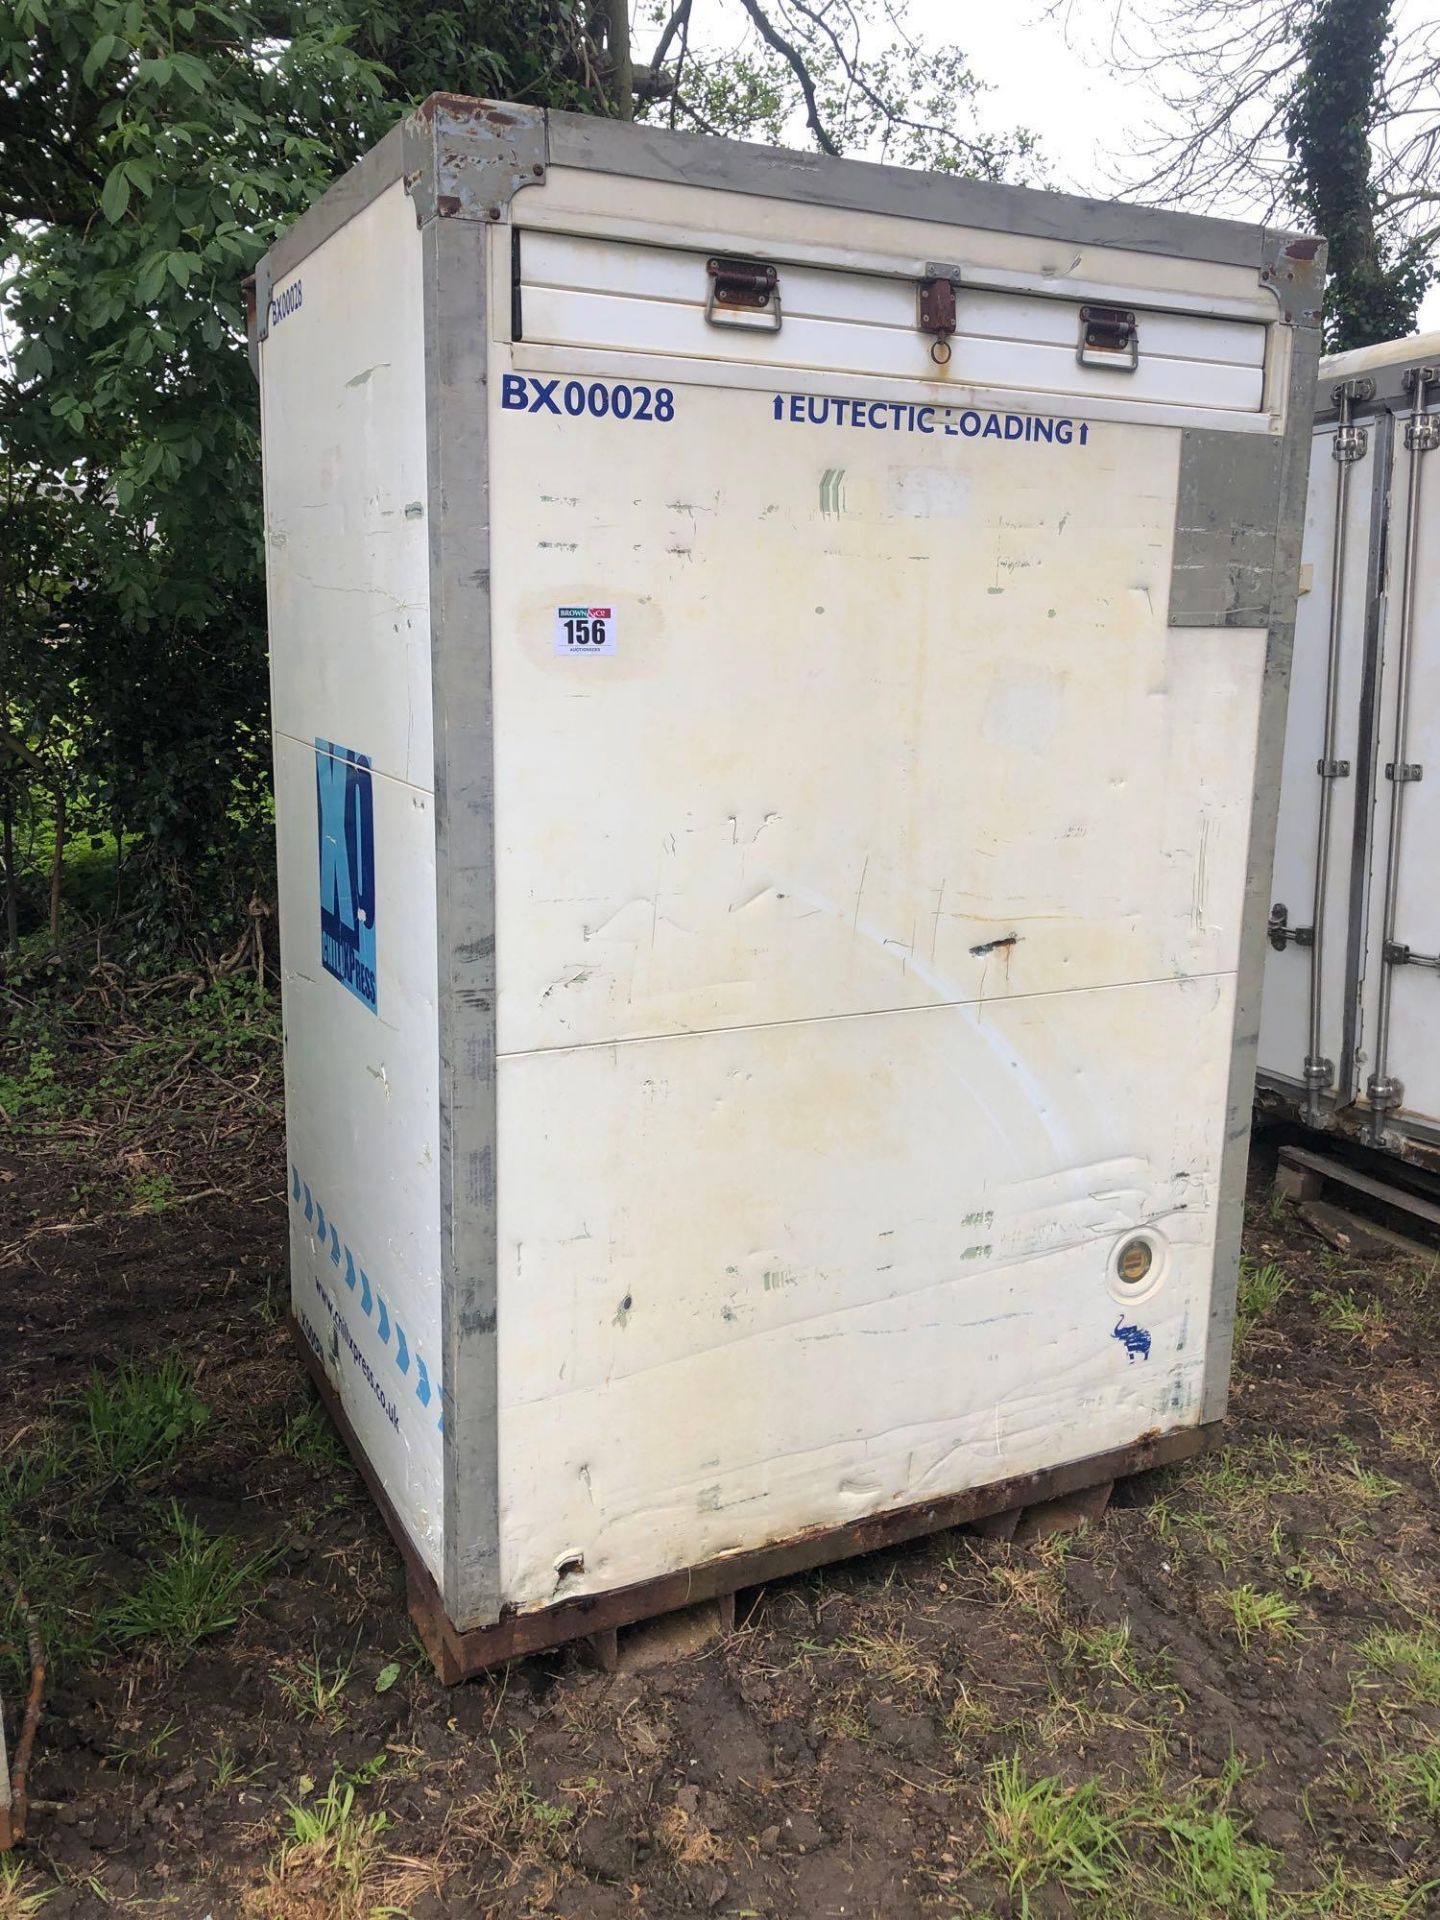 Chill Express storage container used for oil storage, 1.2m x 1.4m x 2.1m